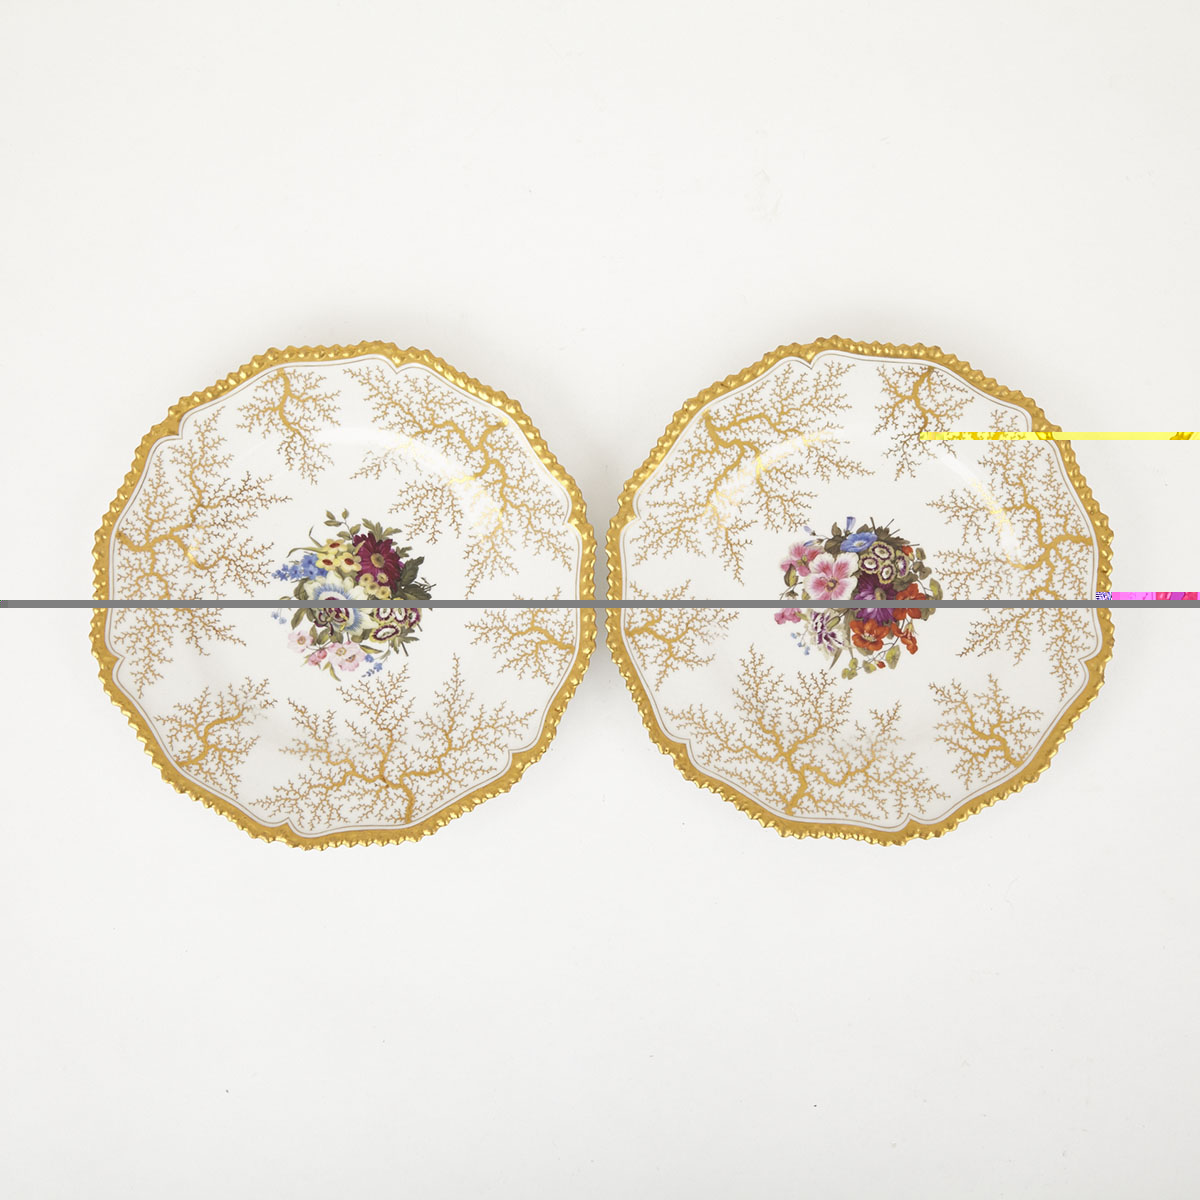 Pair of Barr, Flight & Barr Worcester Flower Painted Plates, c.1820